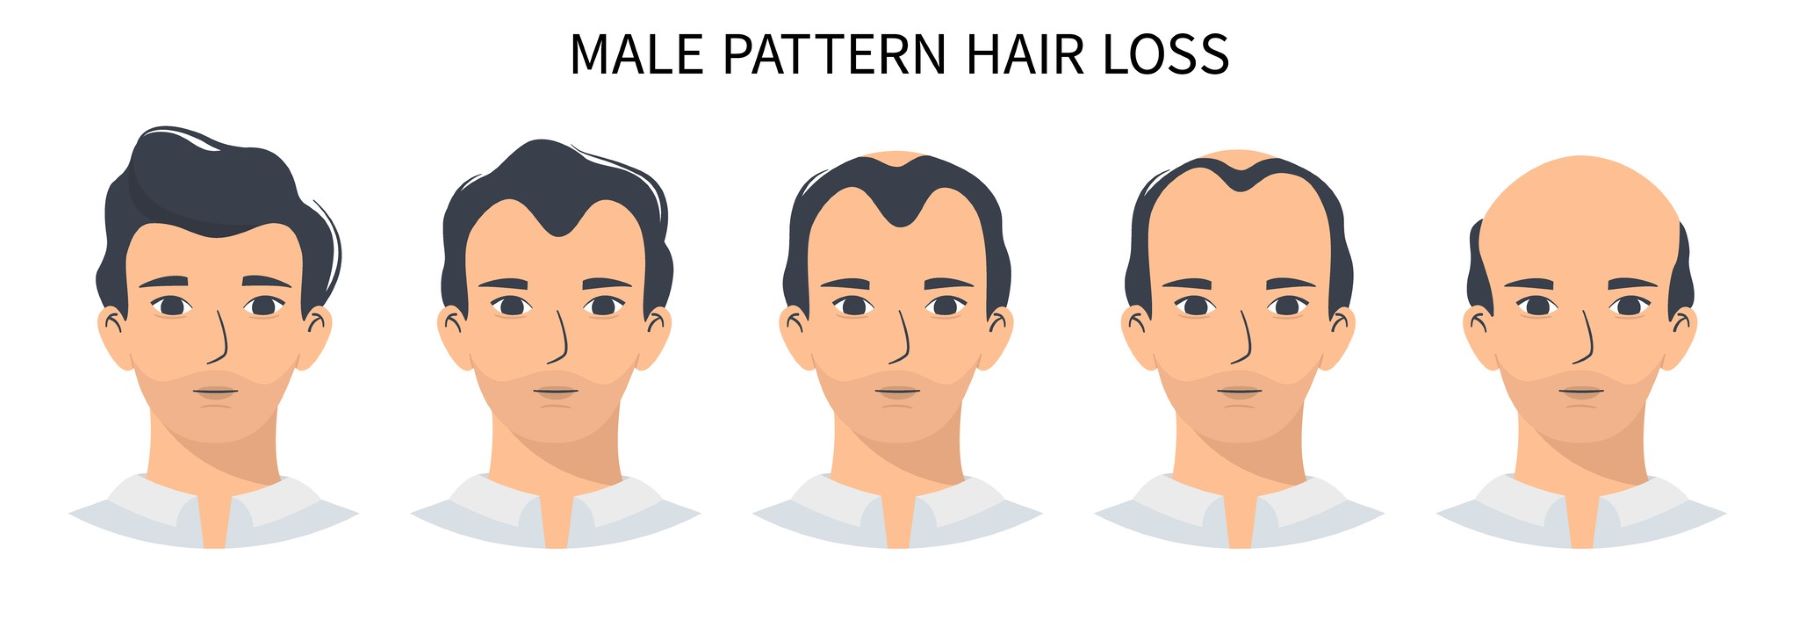 Male hair loss & stages androgenetic alopecia